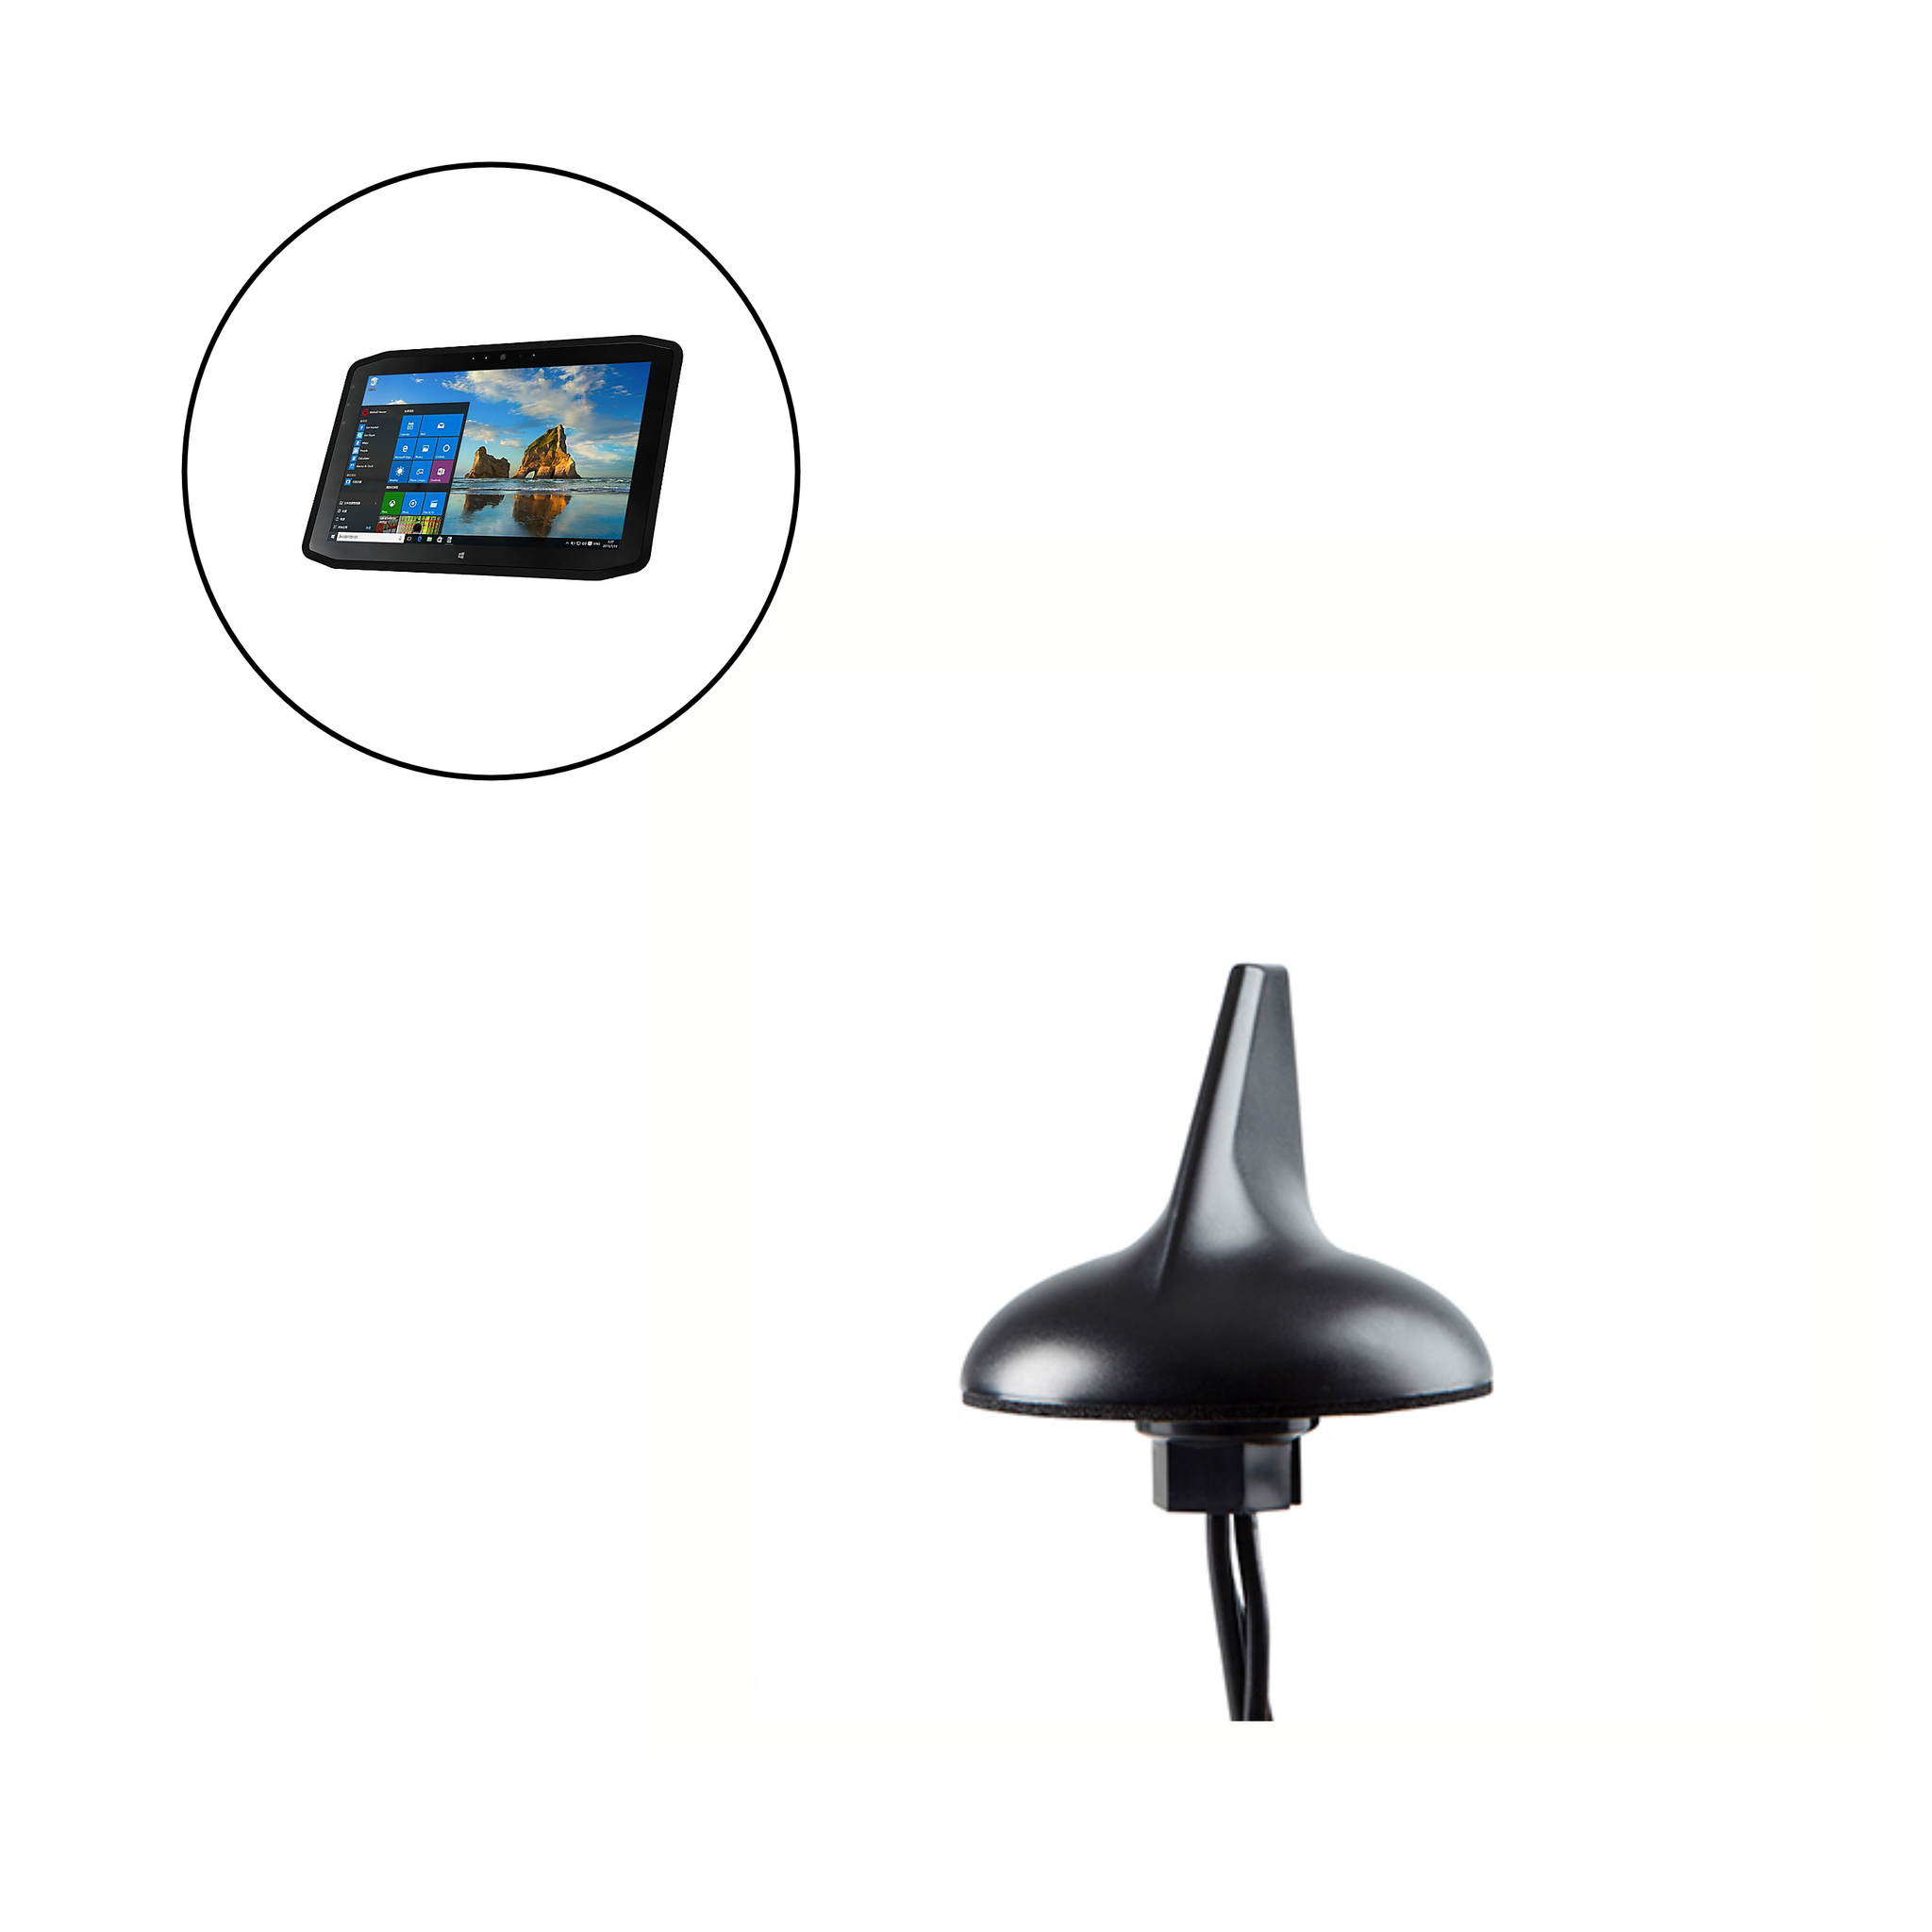 External Antenna for XPLORE R12 Vehicle Tablet, – RFMAX